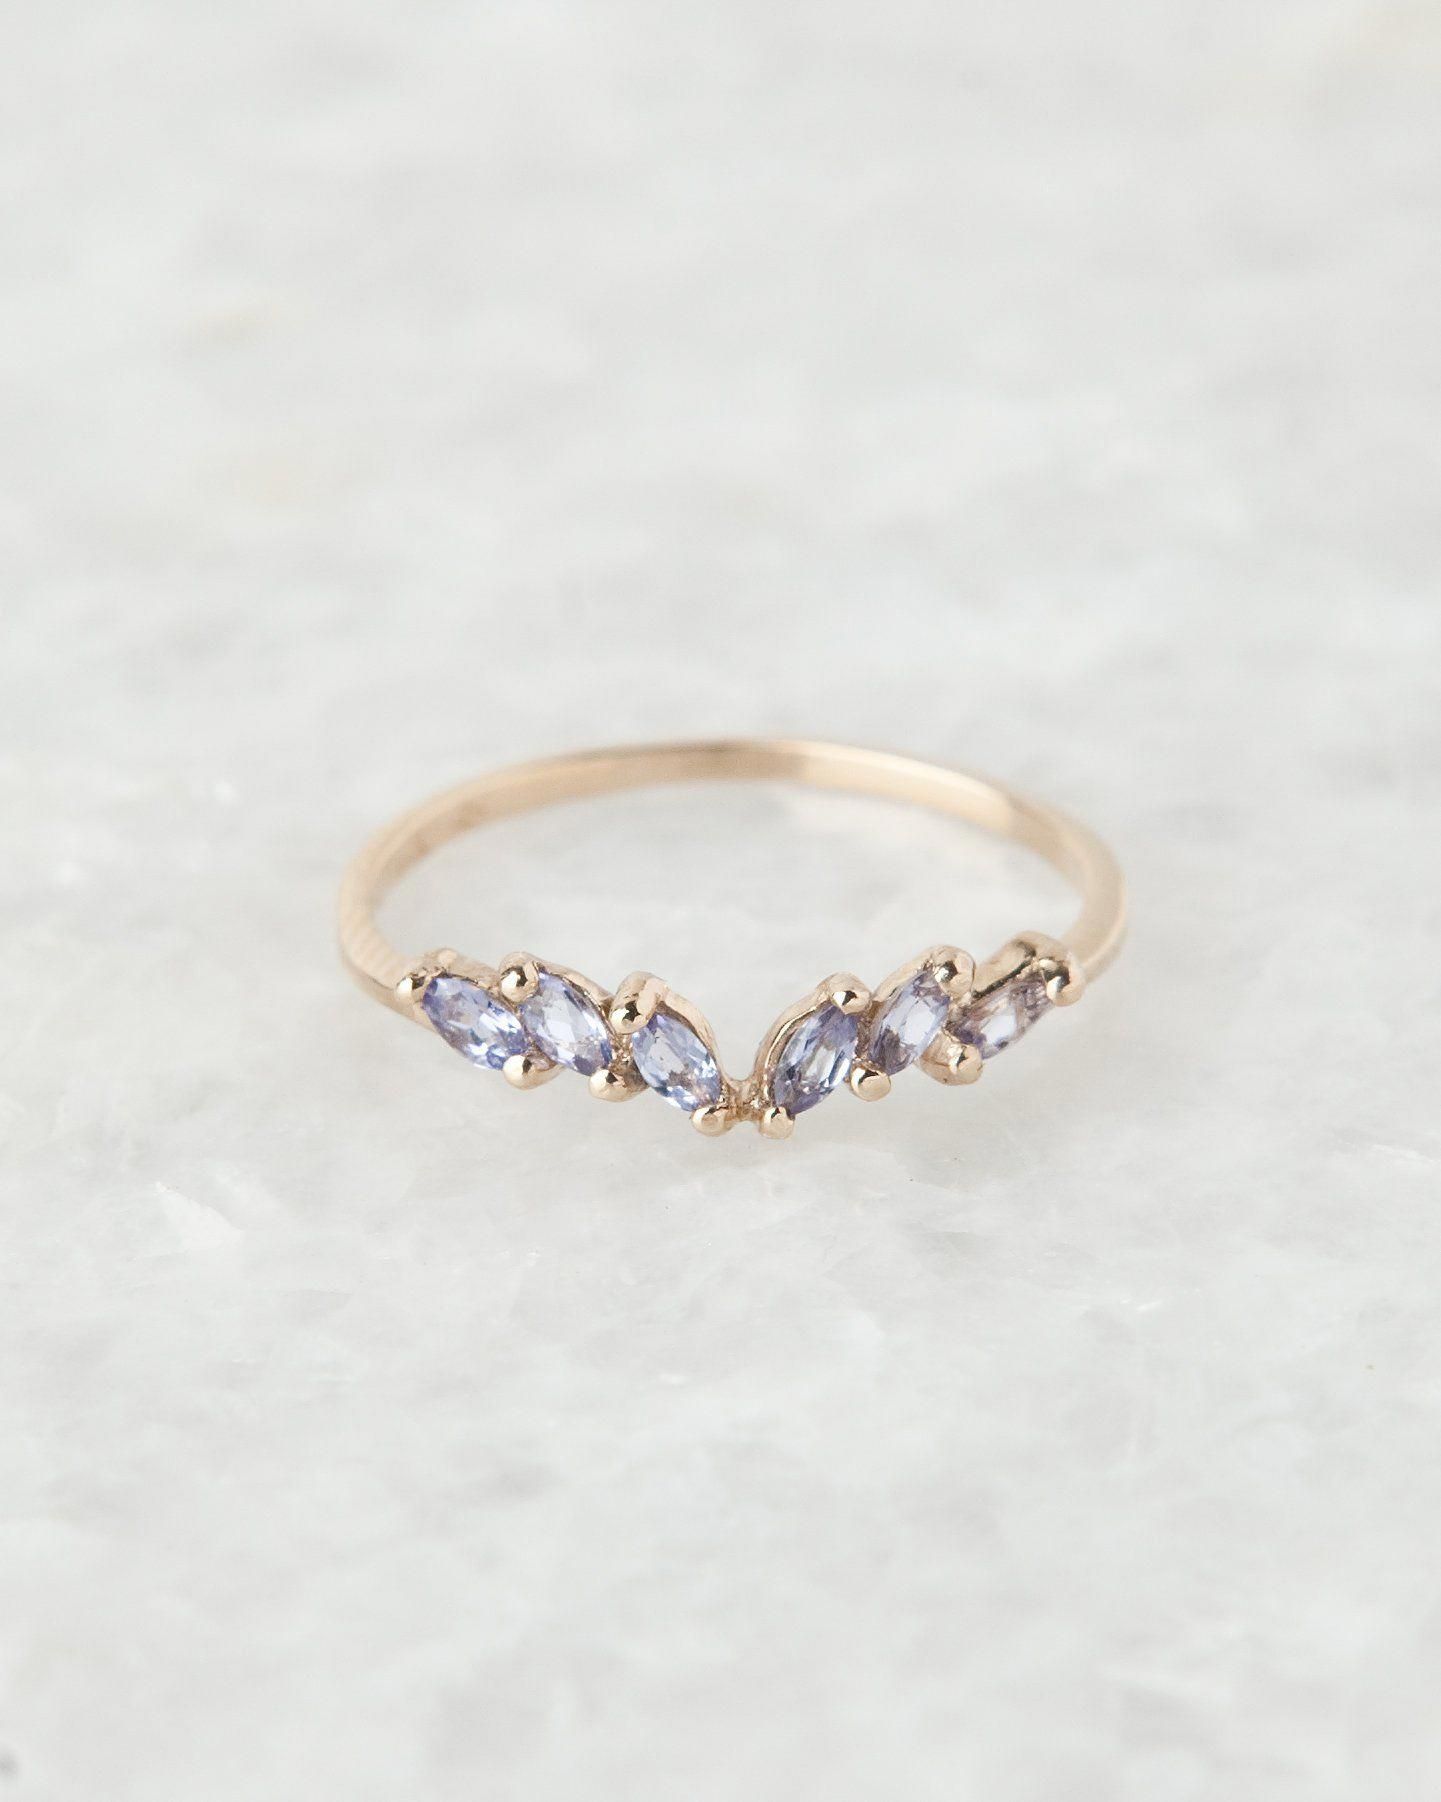 Unique wedding band women rose gold Vintage Double Cross Diamond ring Delicate Criss Hollow Promise matching band Anniversary gift for her - Fine Jewelry Ideas -   18 wedding Bands leaves ideas